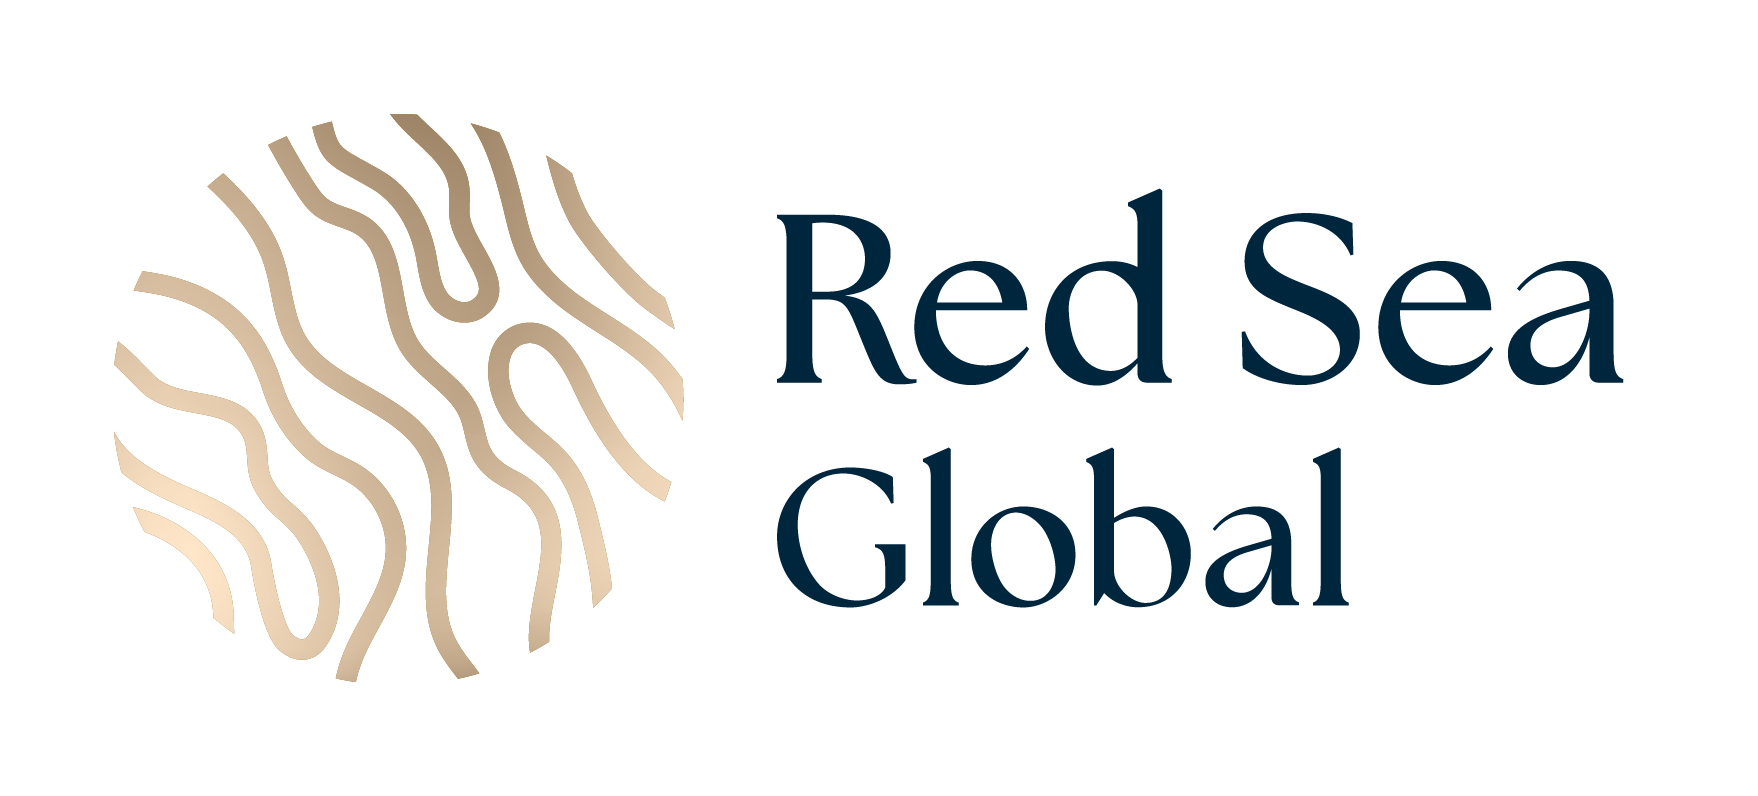 Red Sea Global sets sights on becoming world’s most responsible developer